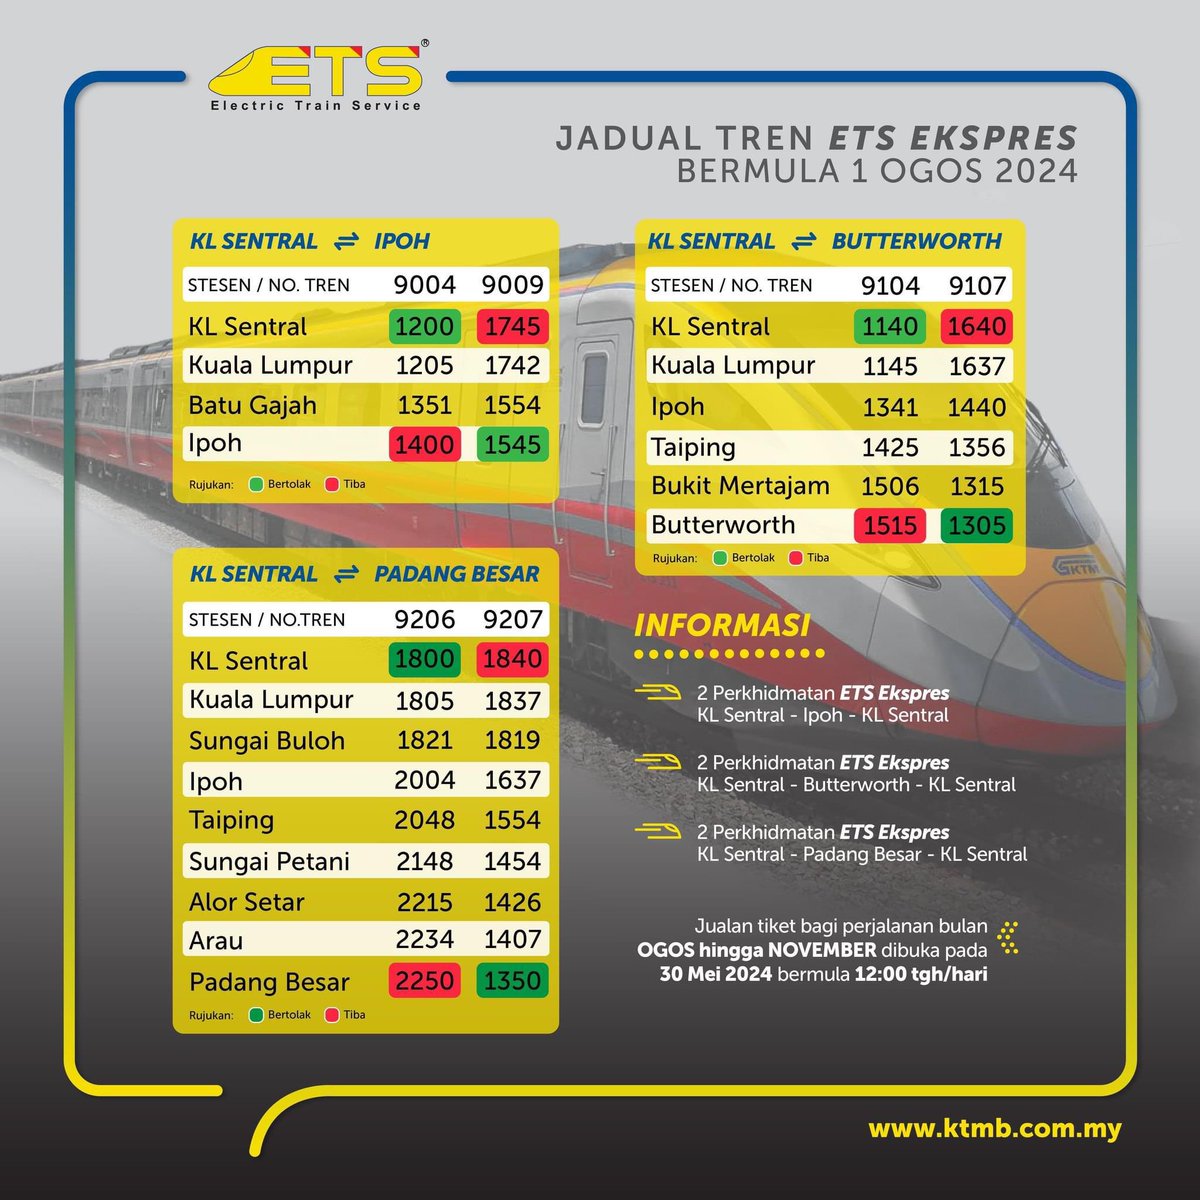 🚨BREAKING NEWS!!!🚨 ETS had added a new service called ETS Ekspress that is 40m faster than existing ETS Platinum for all of these routes: KL - Ipoh KL - Penang KL - Padang Besar, Perlis Service starts this August and tickets will open tomorrow